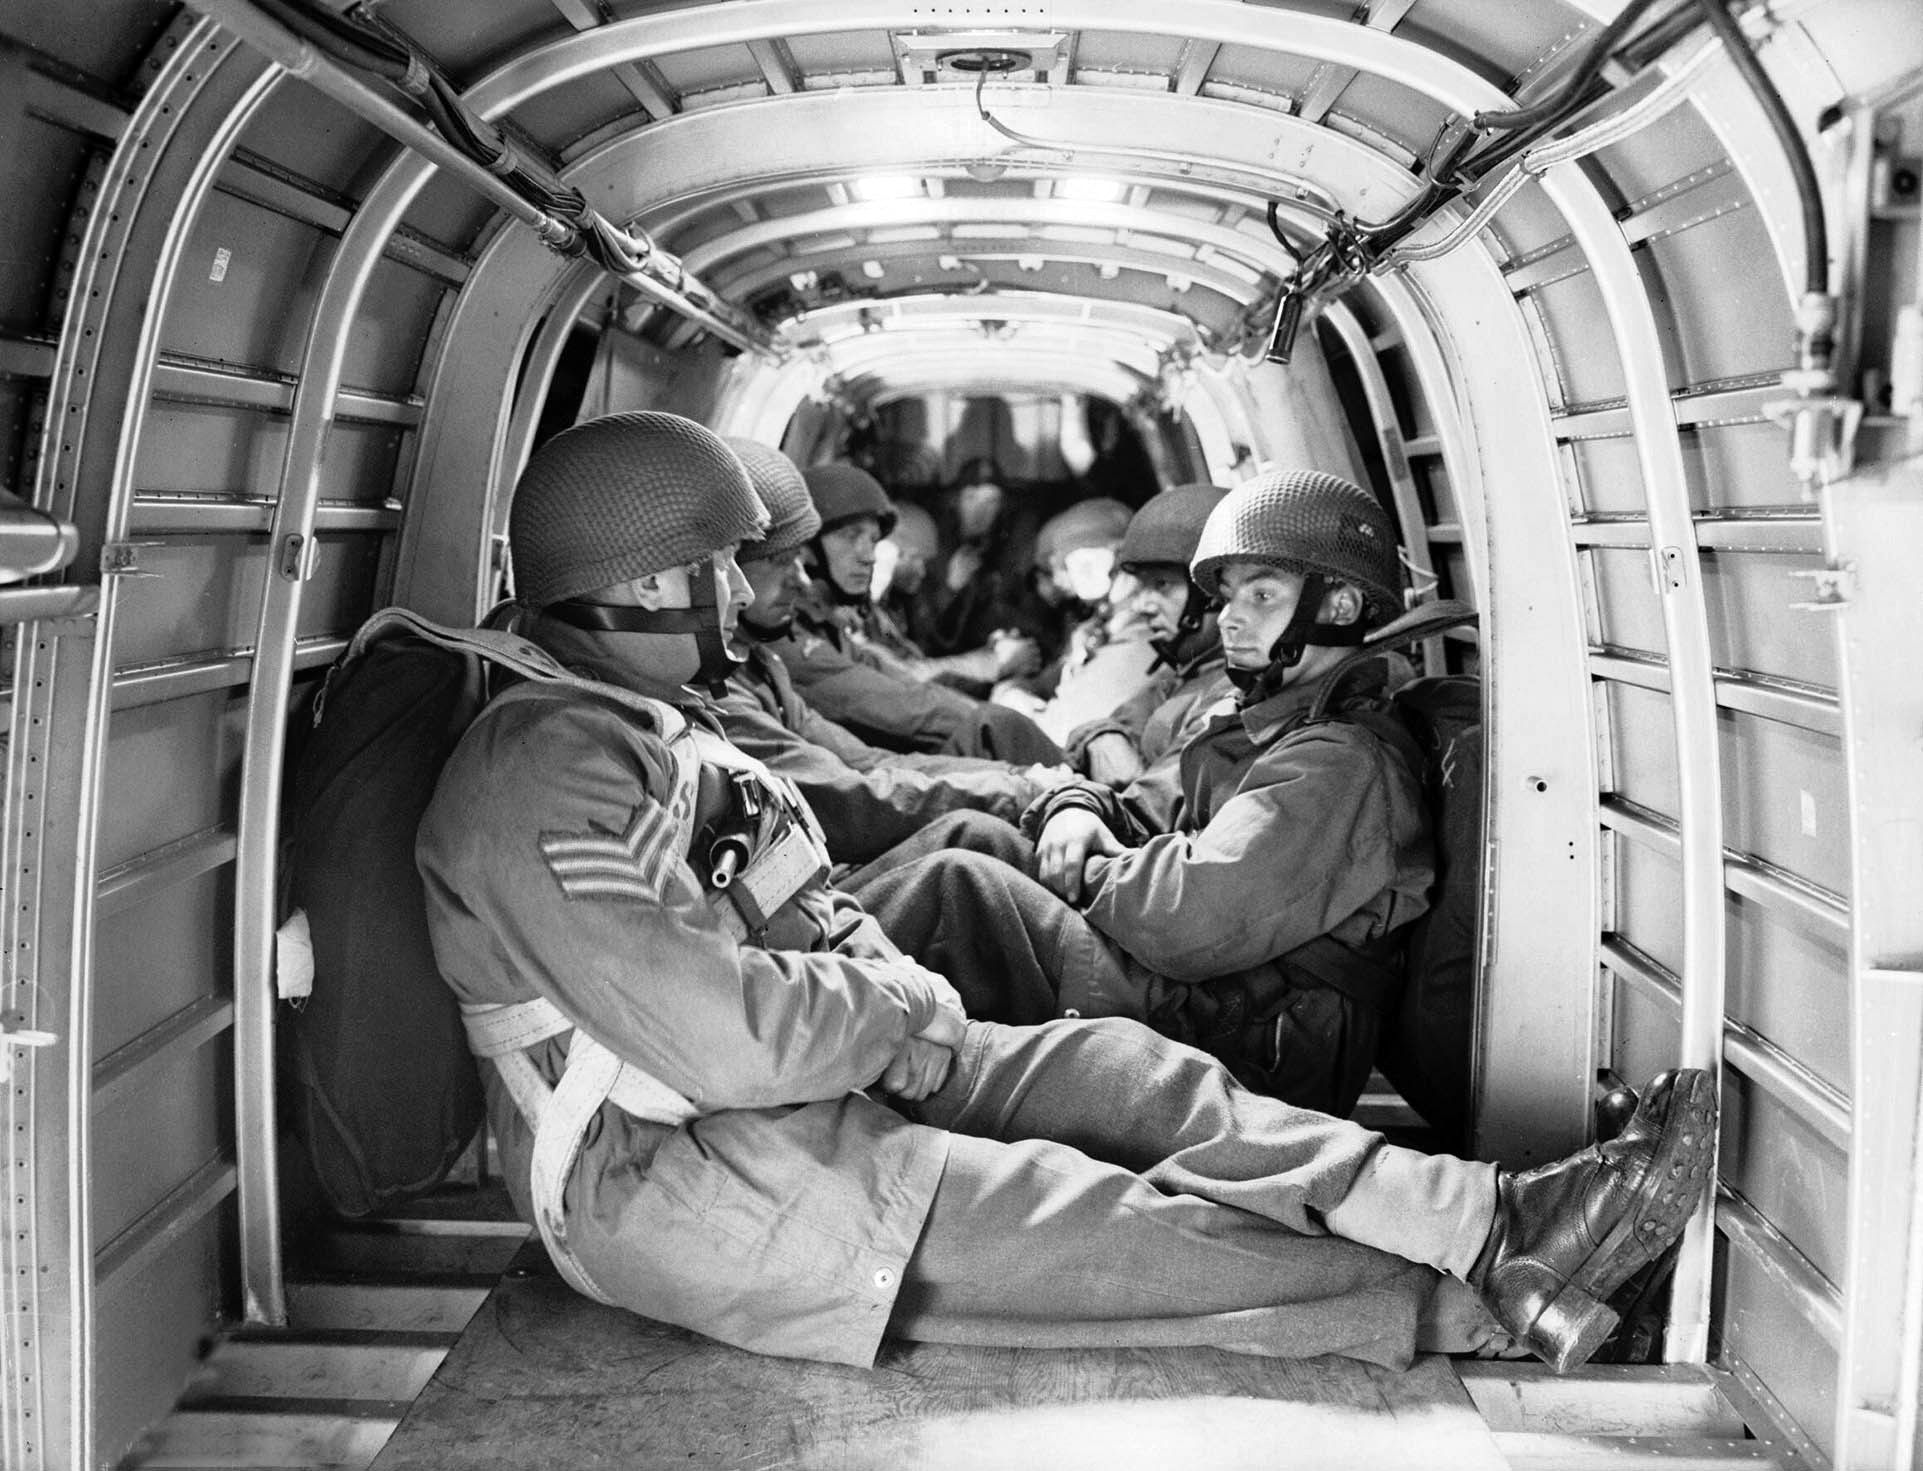 British commandos sit aboard a Whitworth Whitley aircraft during exercises.